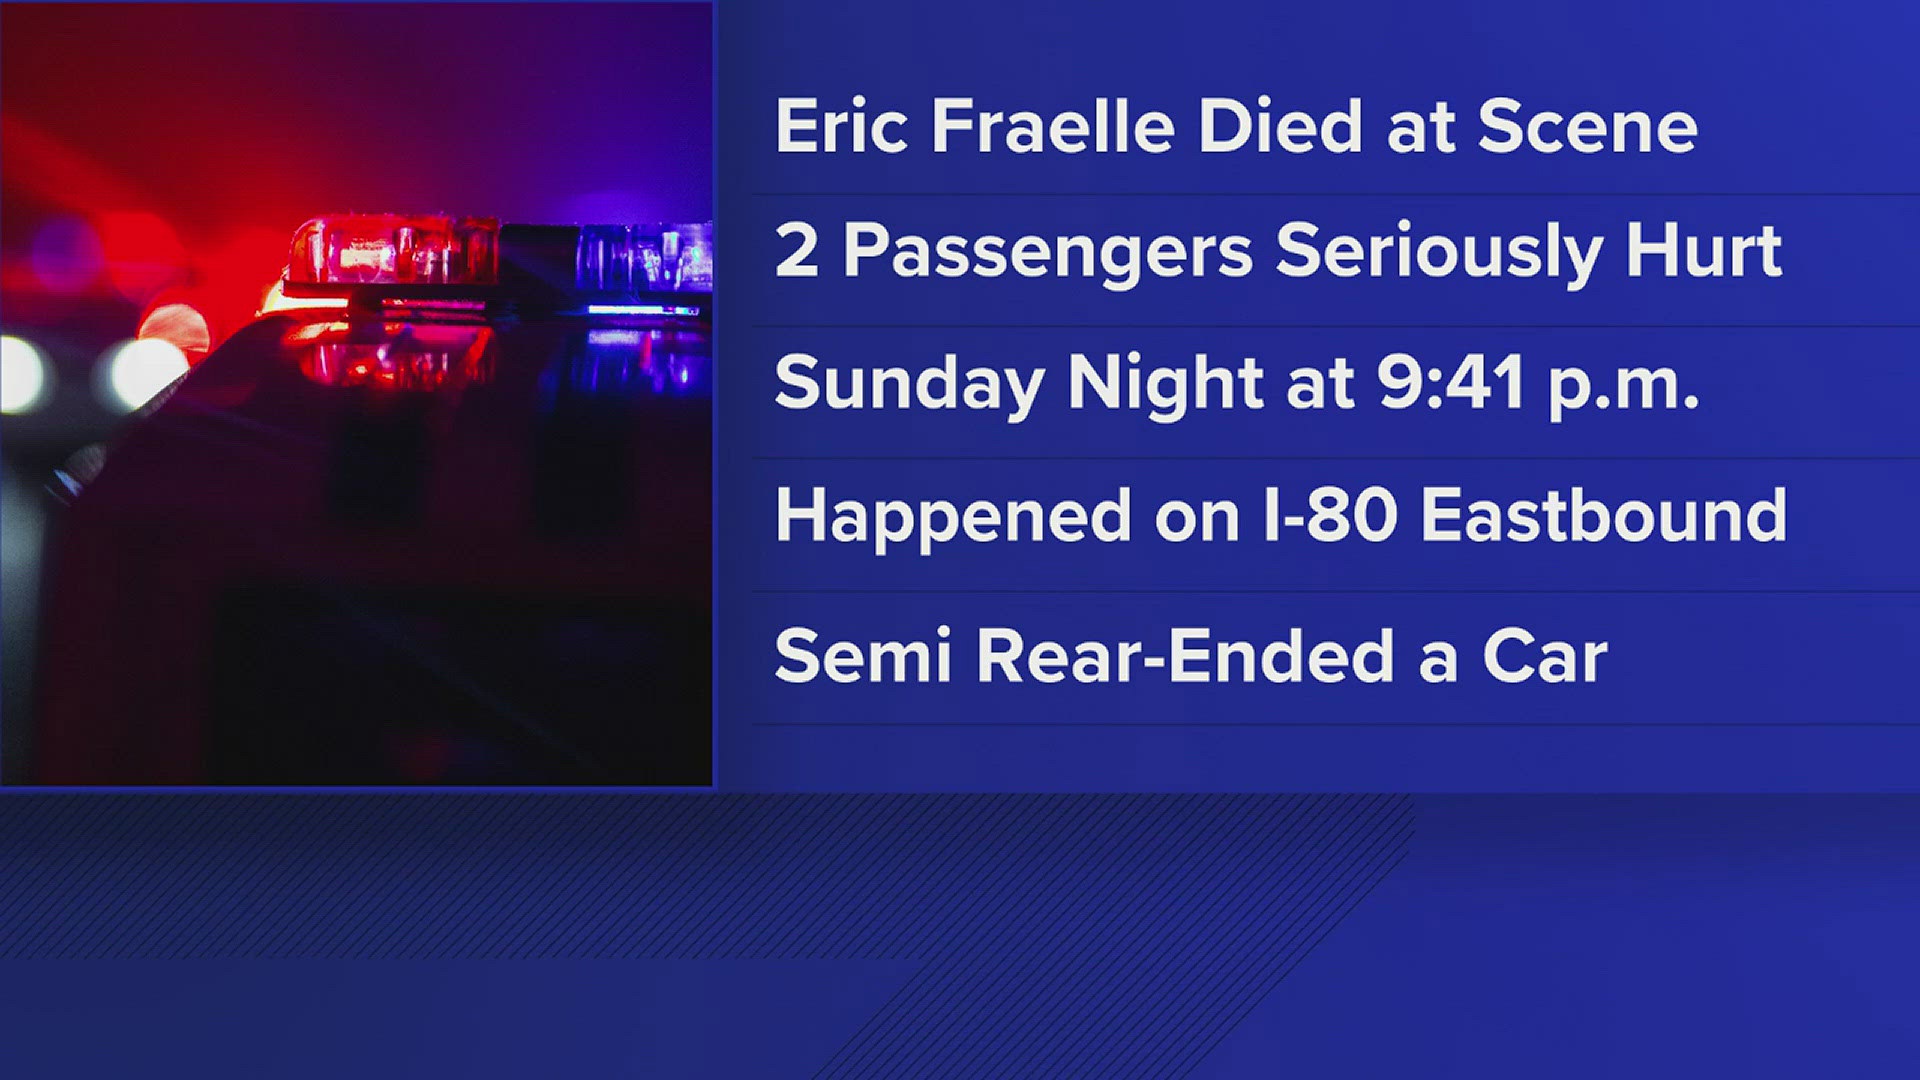 Eric Fraelle died at the scene after police say a semi rear-ended his car.